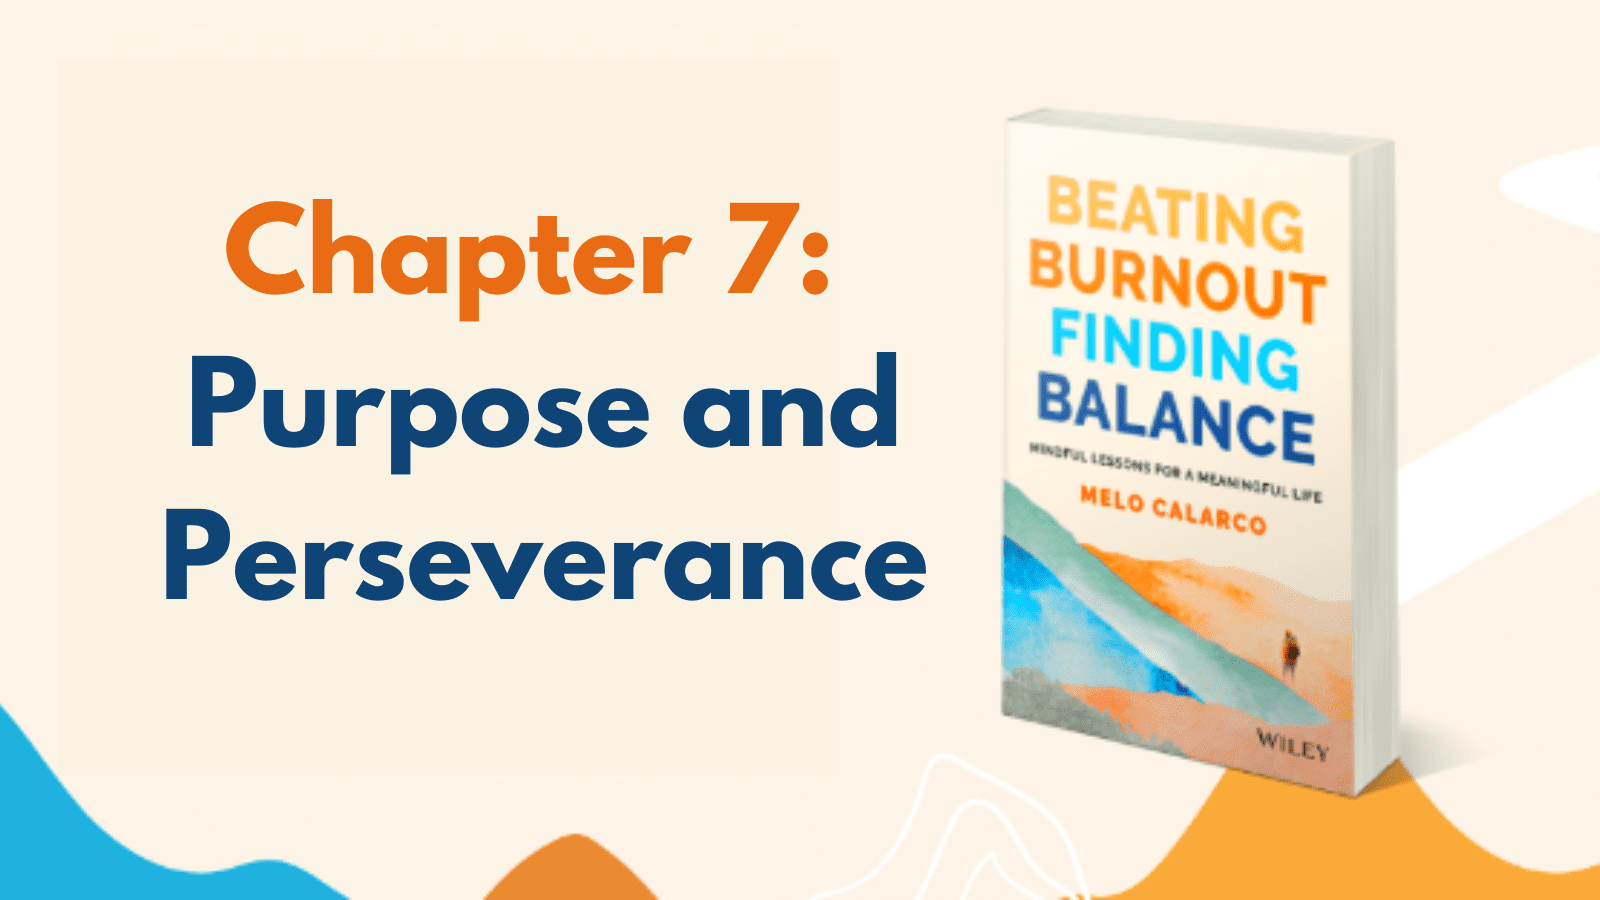 Chapter 7: Purpose and Perseverance